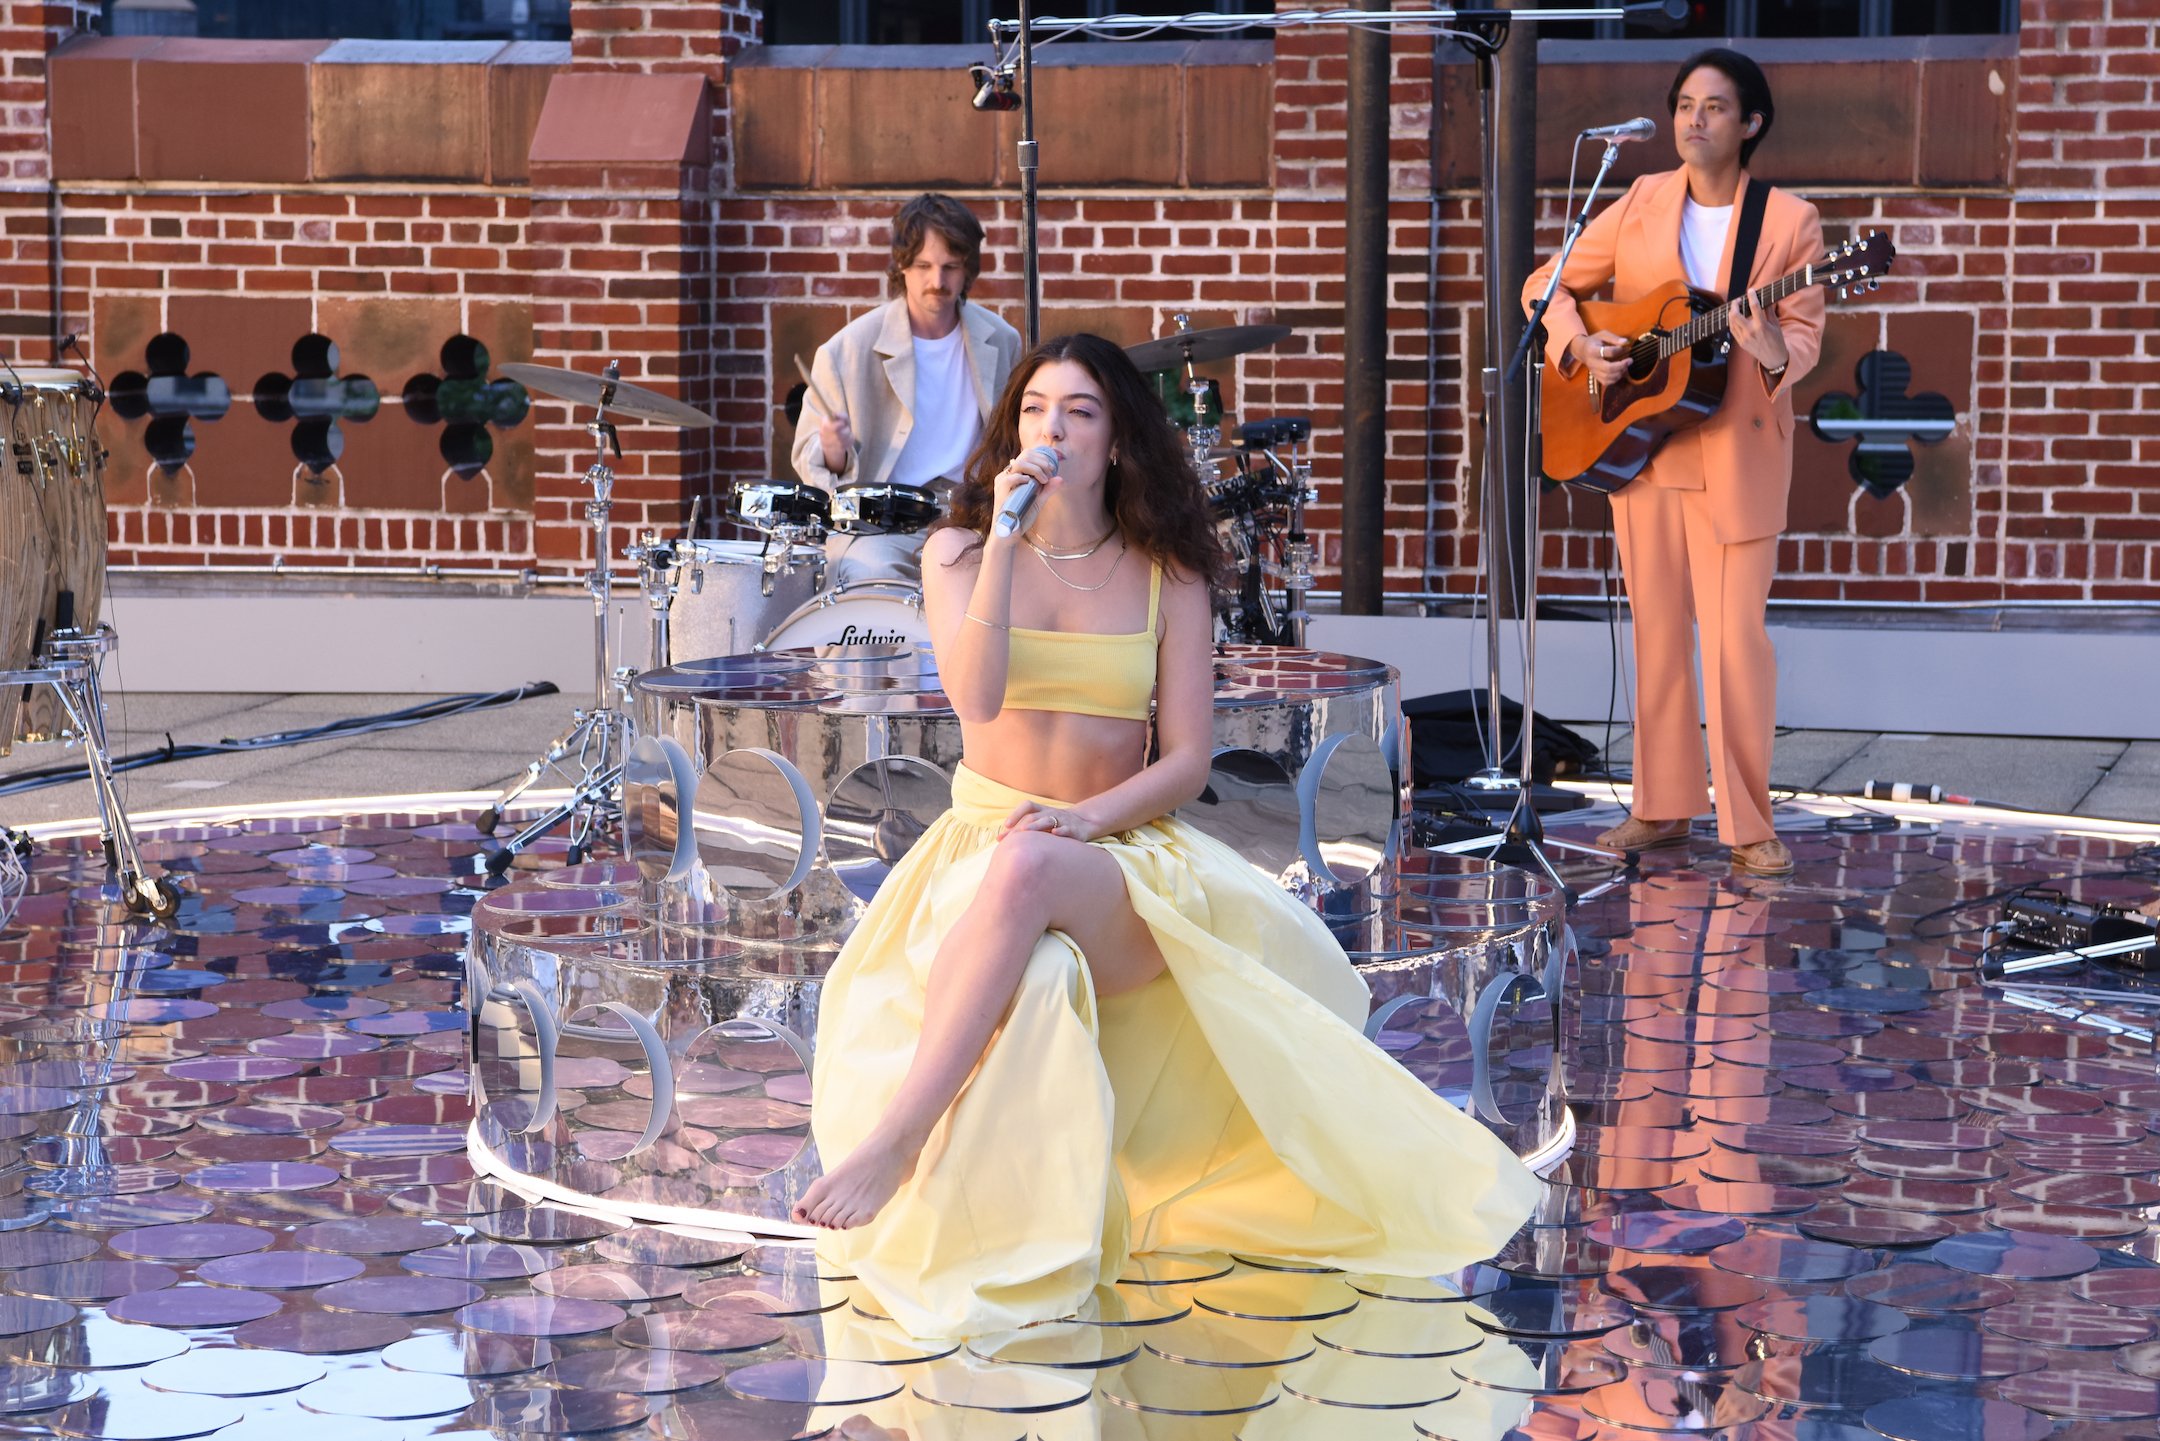 'The Late Show with Stephen Colbert' and musical guest Lorde dressed in yellow